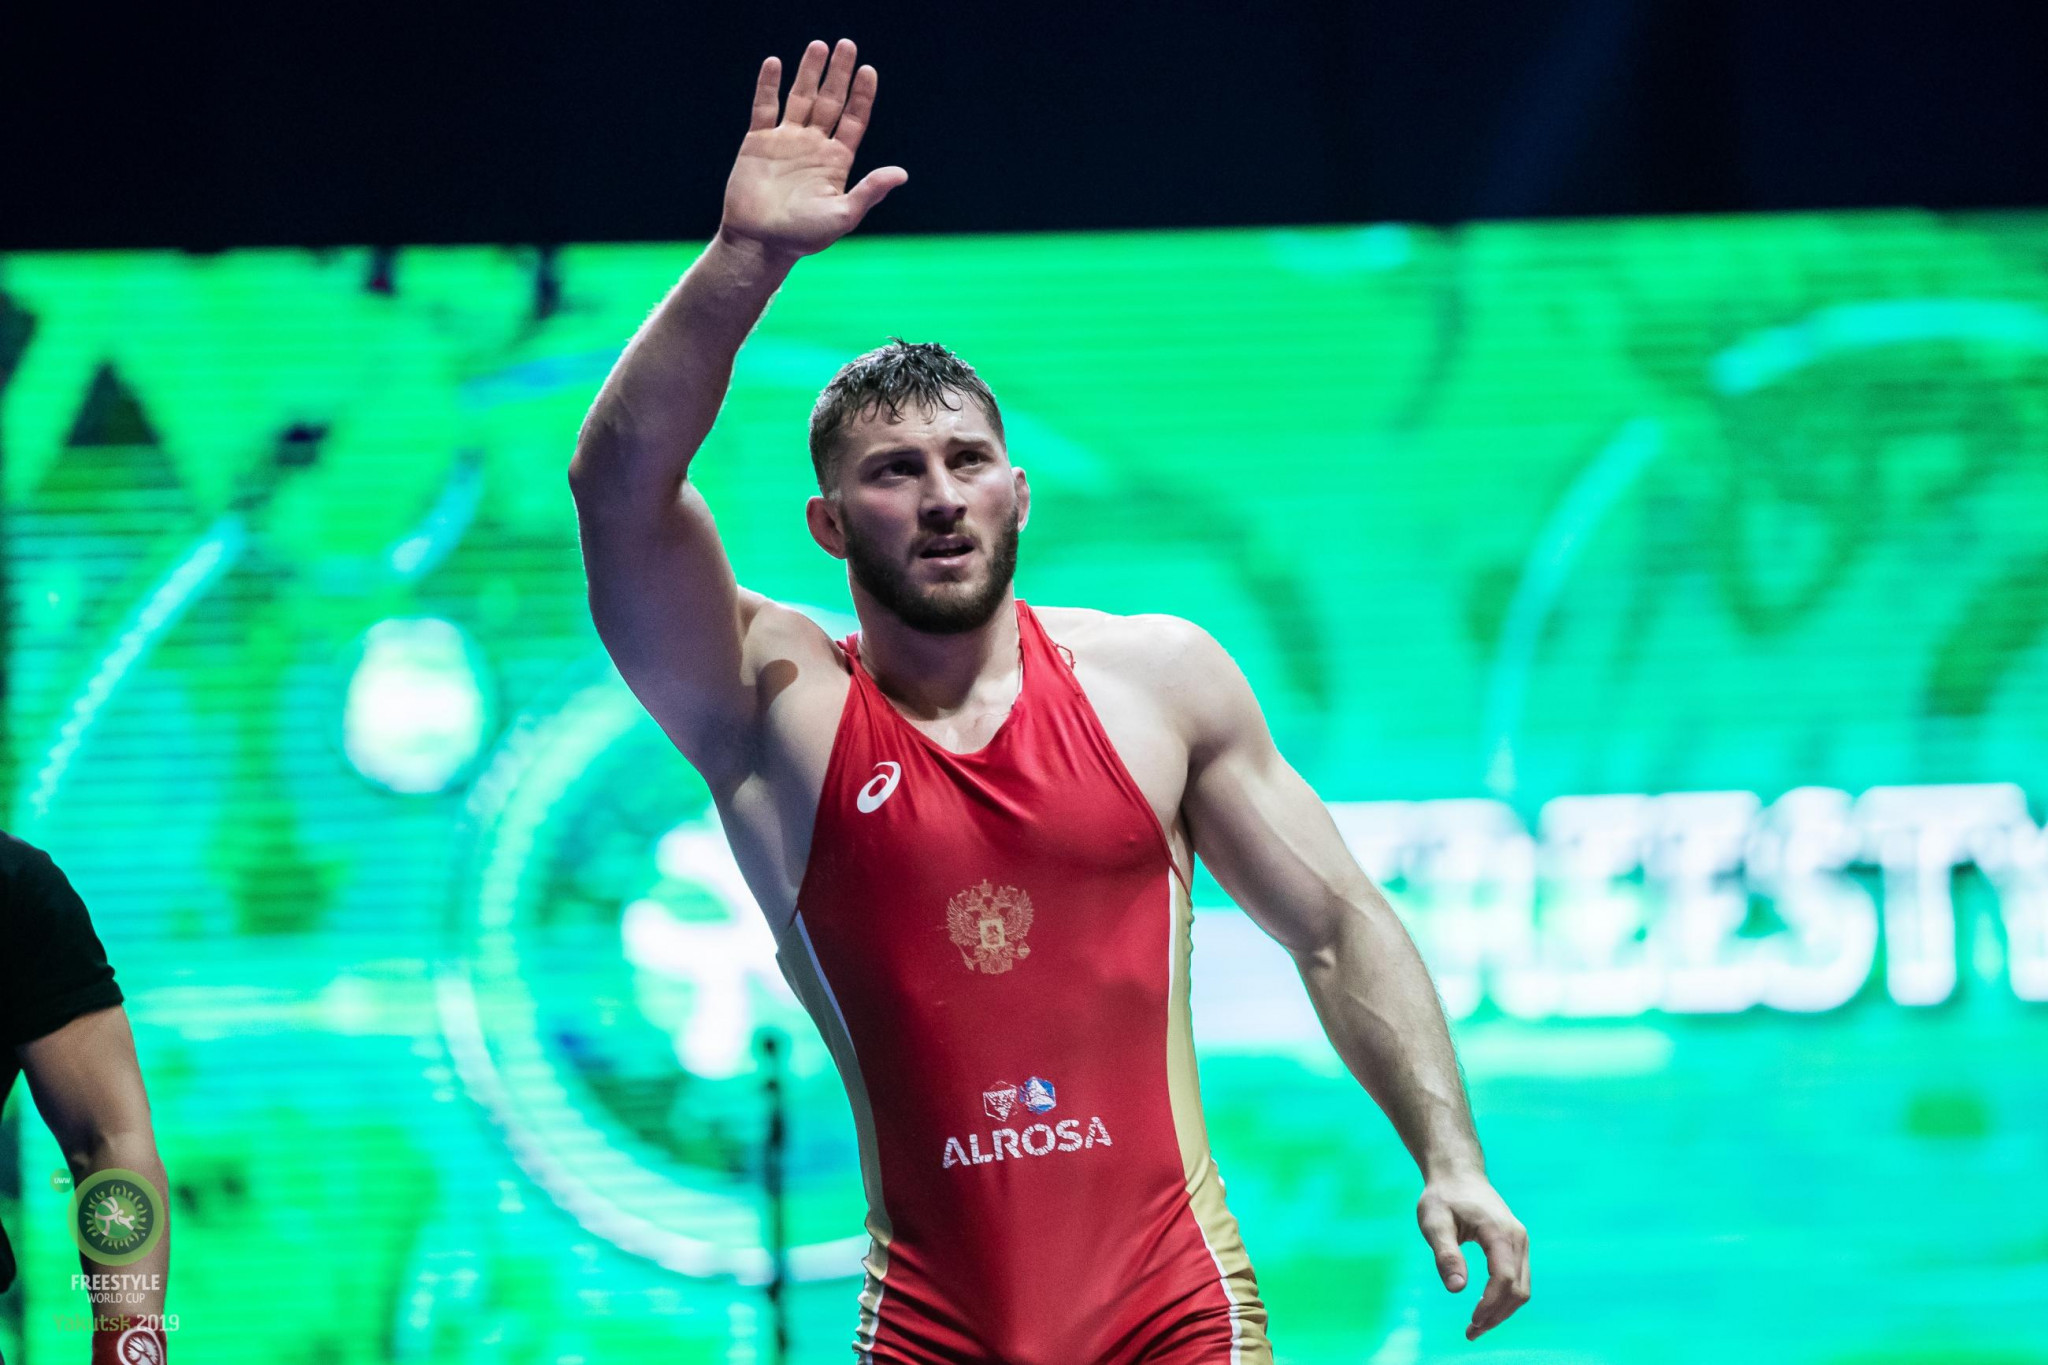 Russia took their first UWW Freestyle World Cup title since 2011 in front of home crowd in Yakutia ©UWW